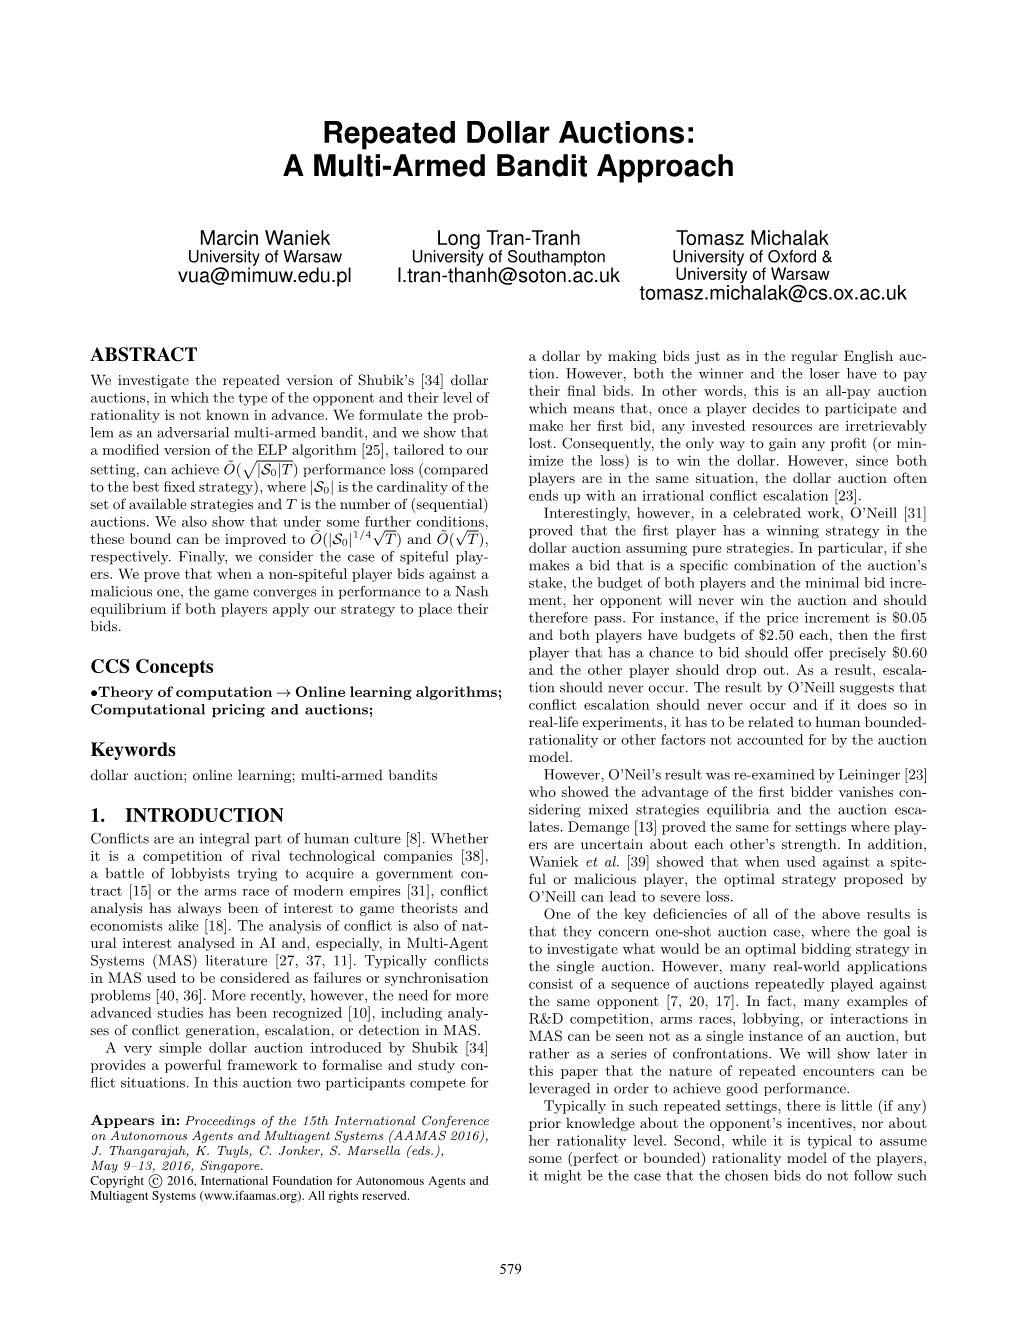 Paper ~ Repeated Dollar Auctions: a Multi-Armed Bandit Approach